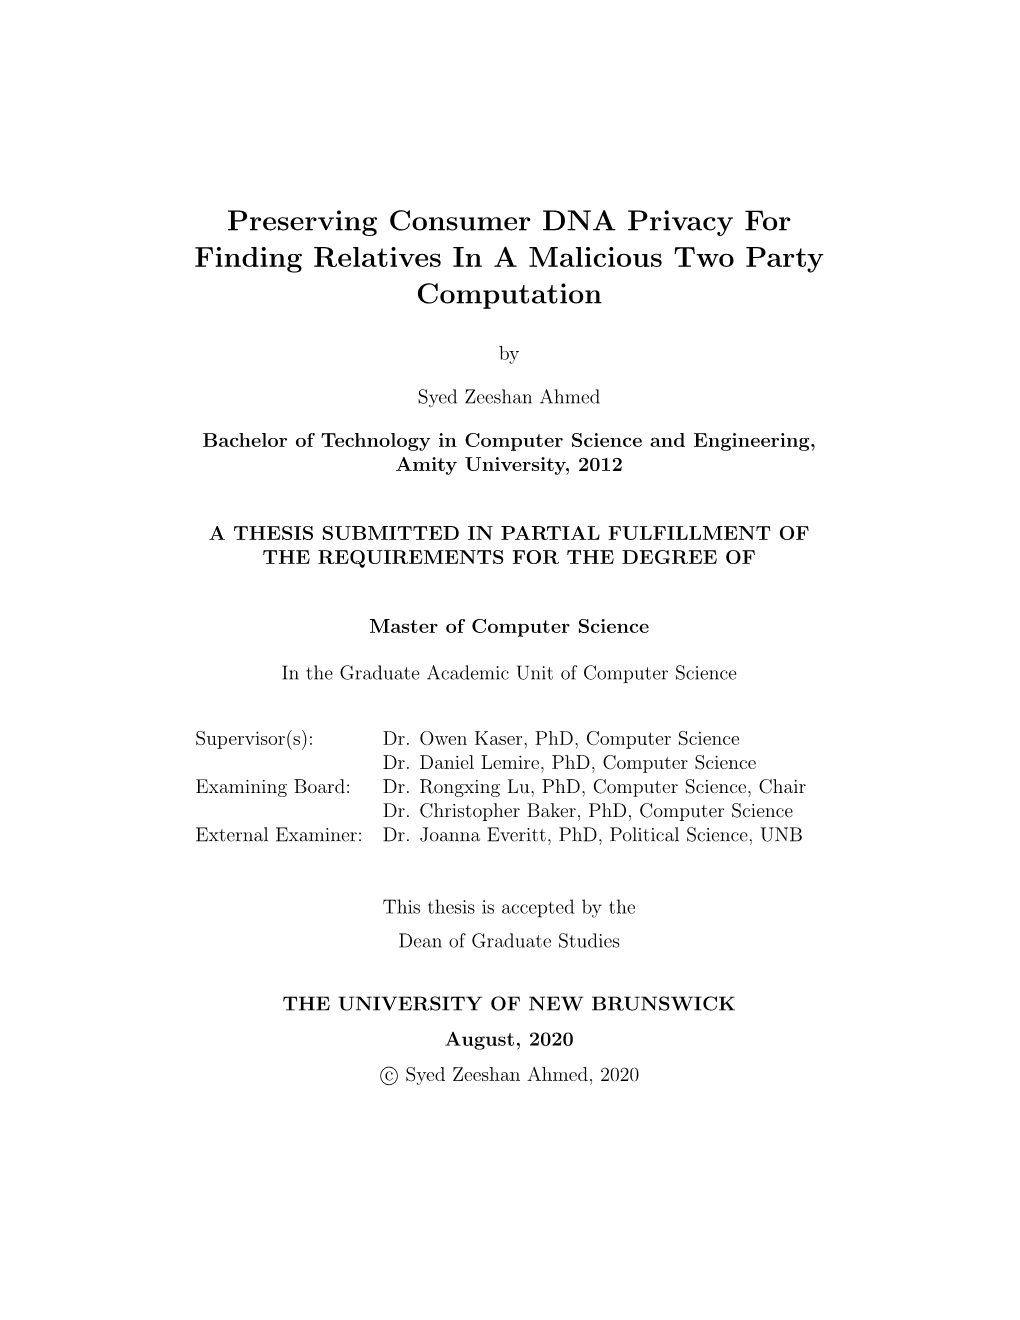 Preserving Consumer DNA Privacy for Finding Relatives in a Malicious Two Party Computation